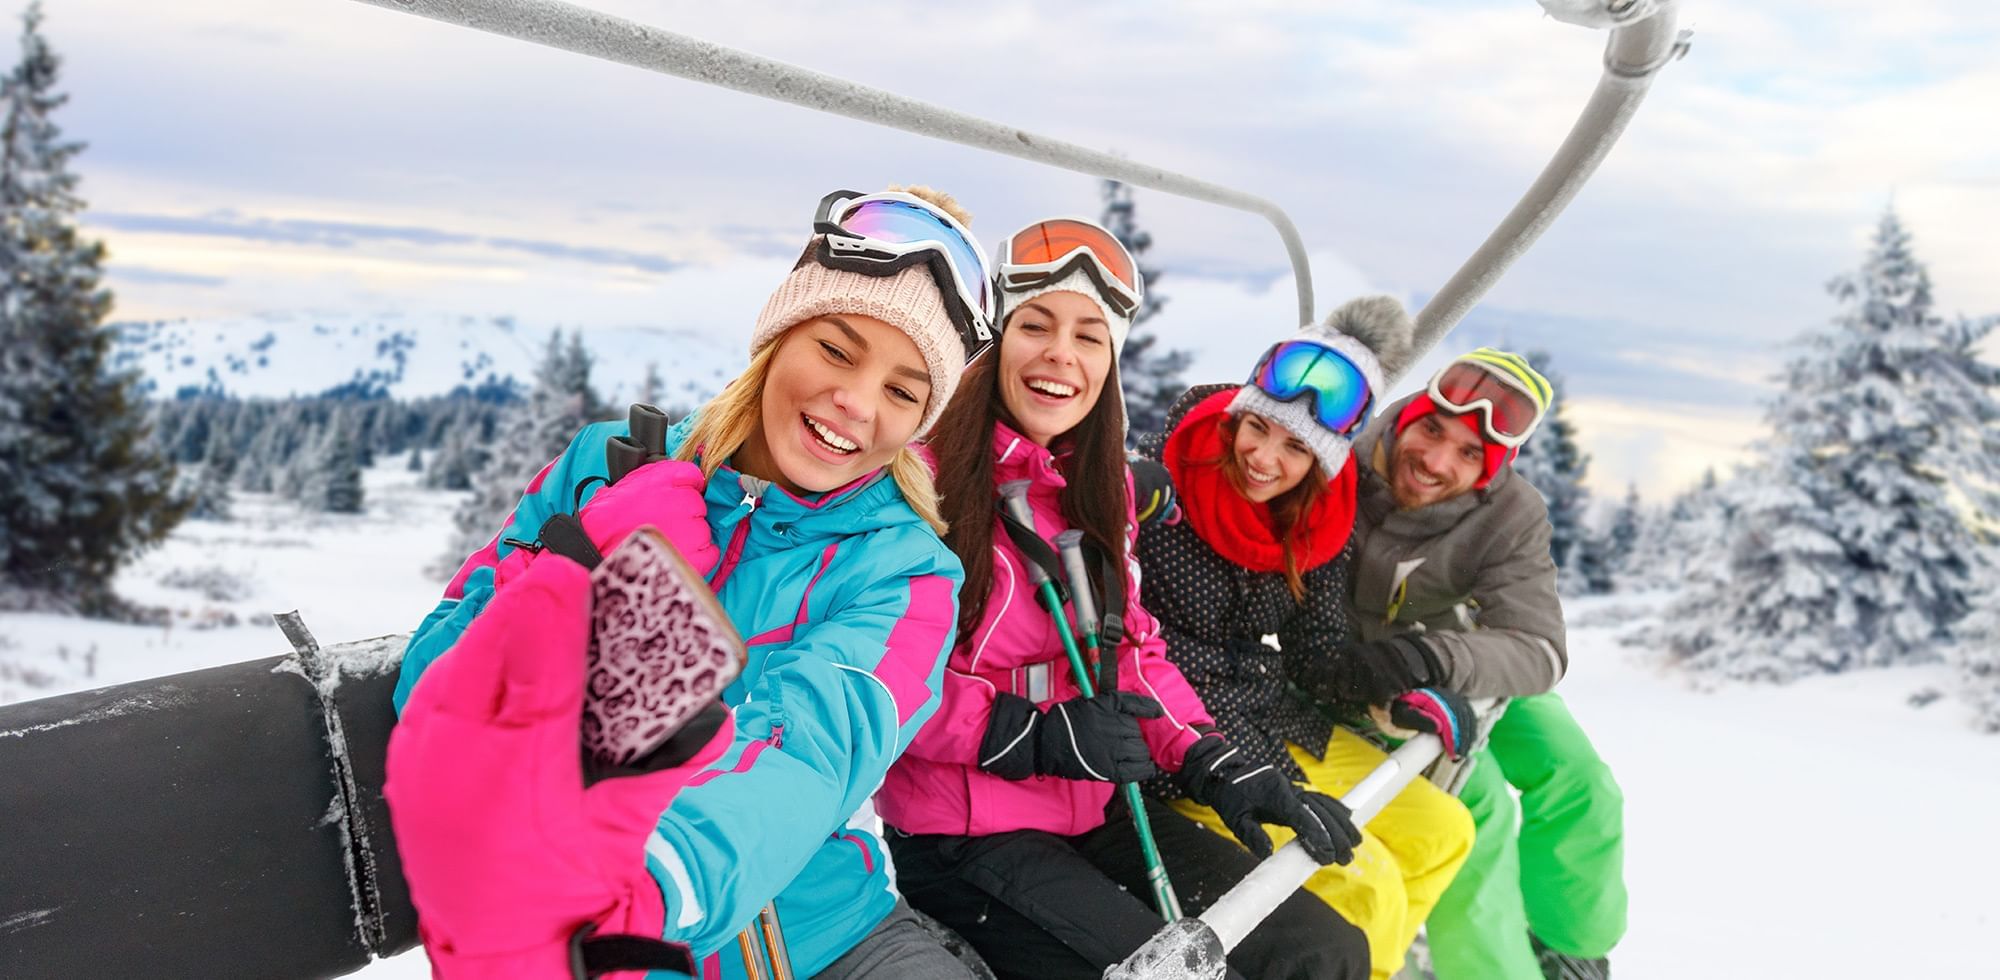 group of four skiers on a chairlift